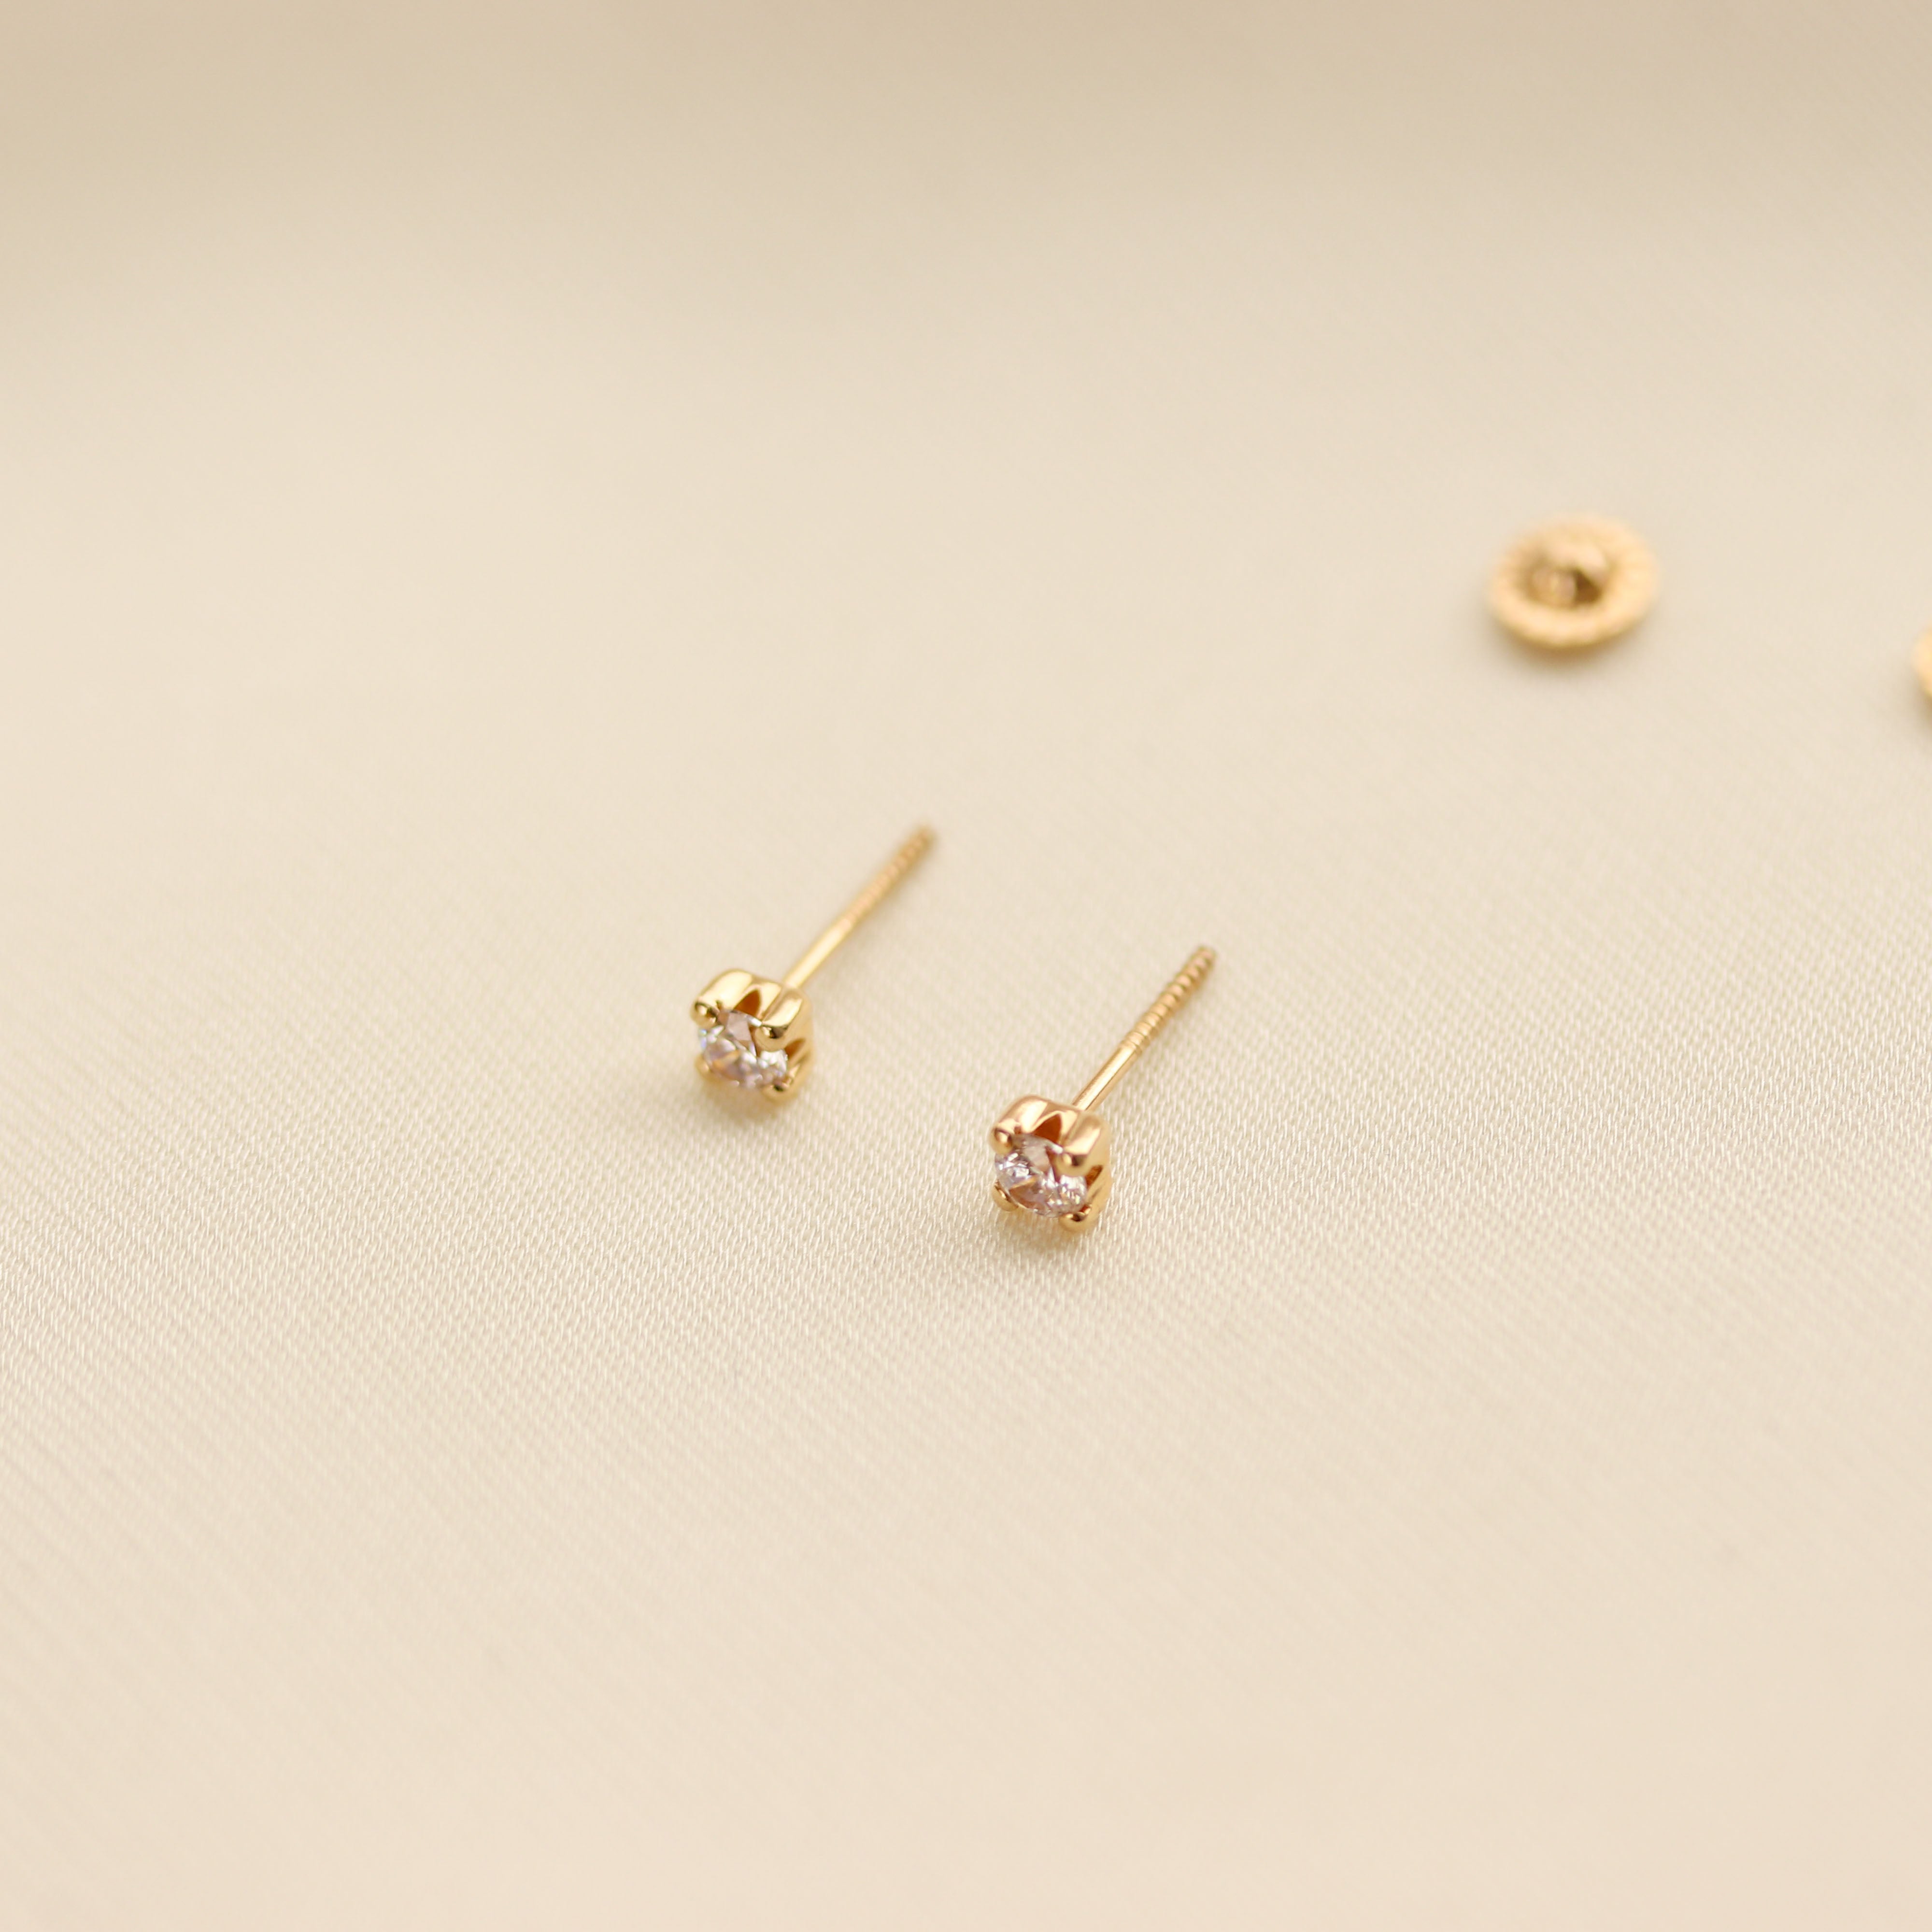 Share more than 246 simple small gold earrings super hot